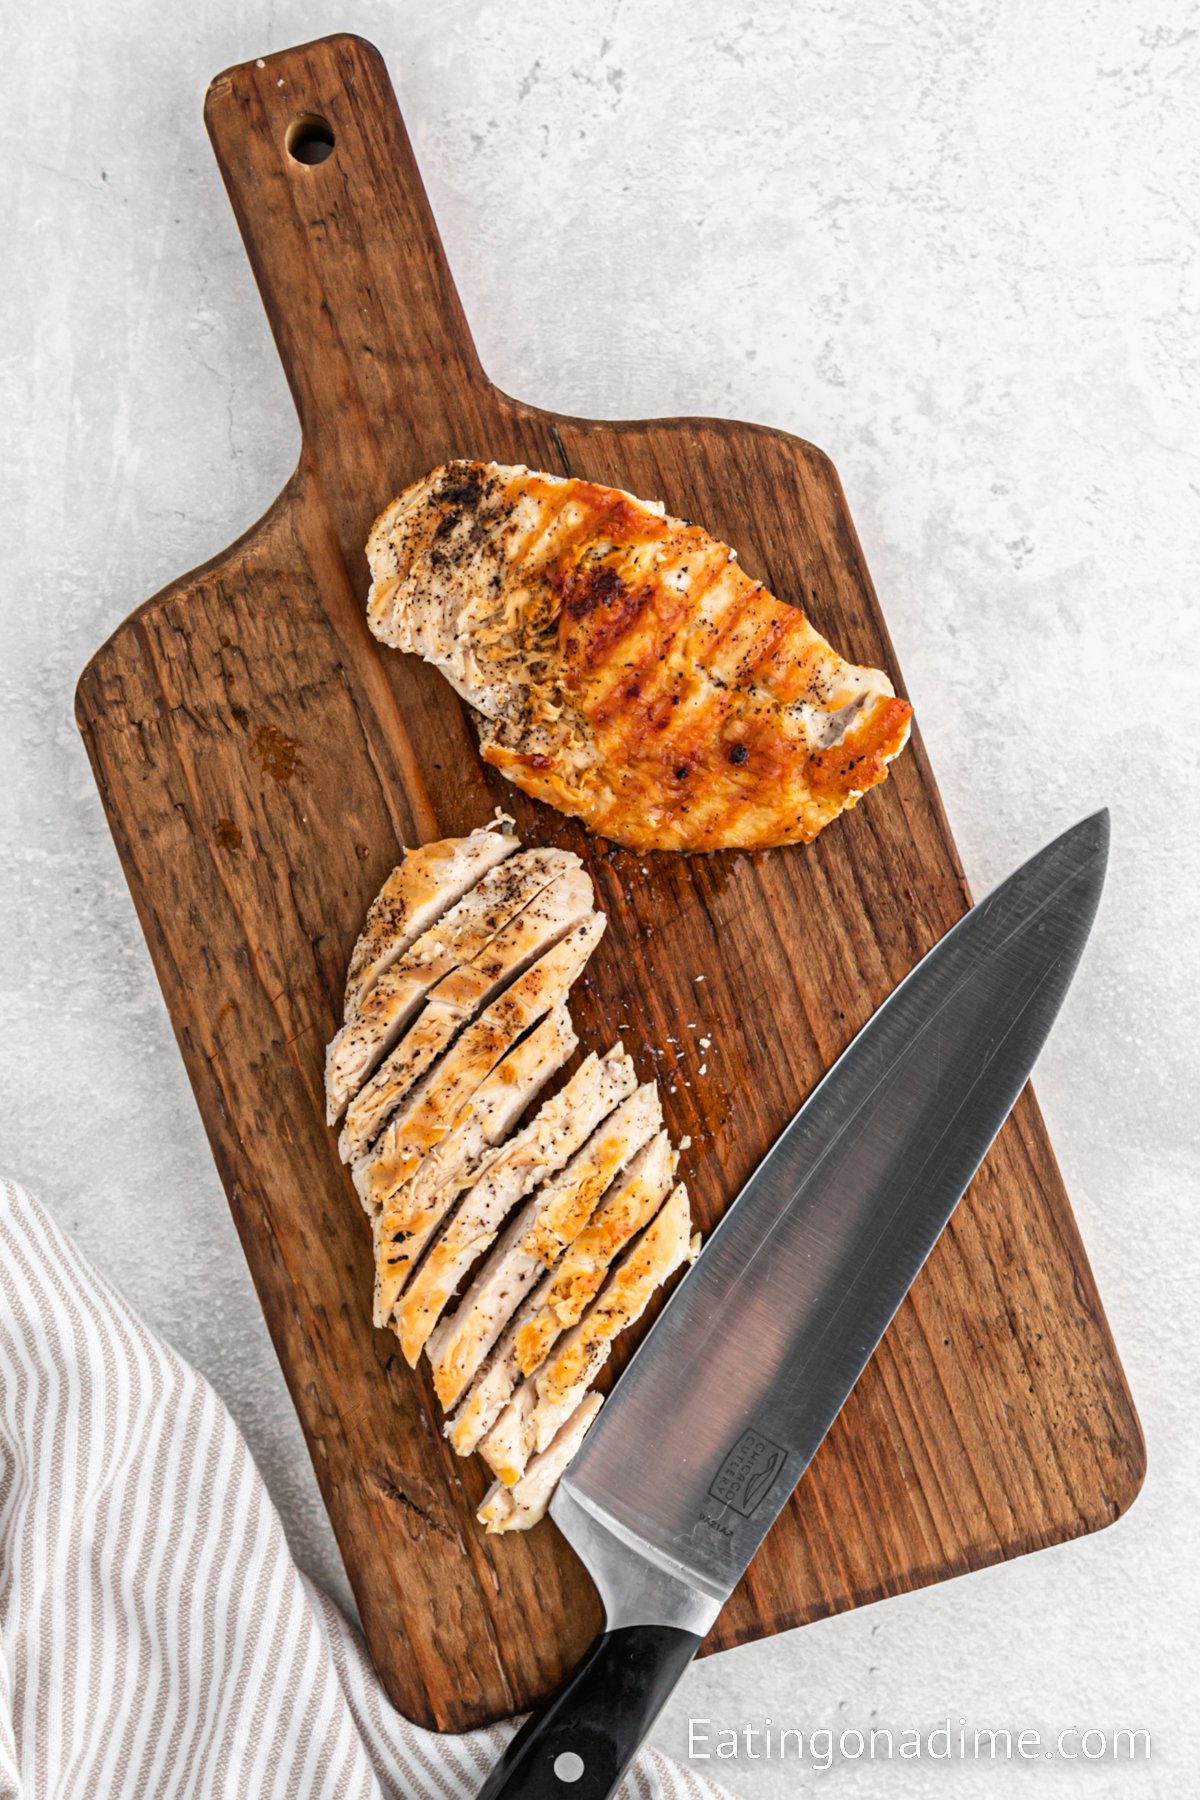 Slicing cooked chicken on a cutting board